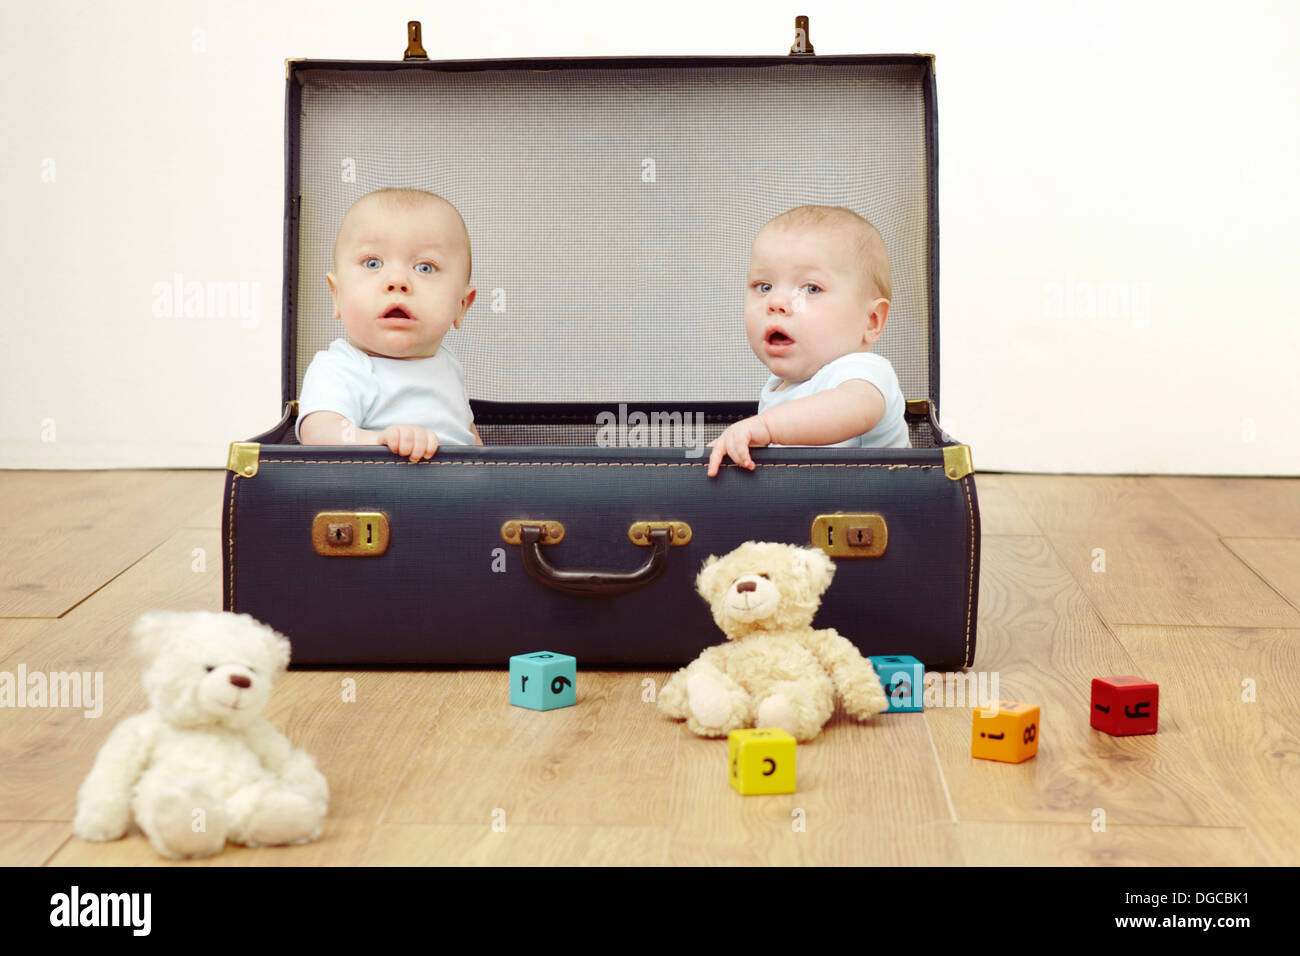 Two baby boys sitting in suitcase, portrait Stock Photo